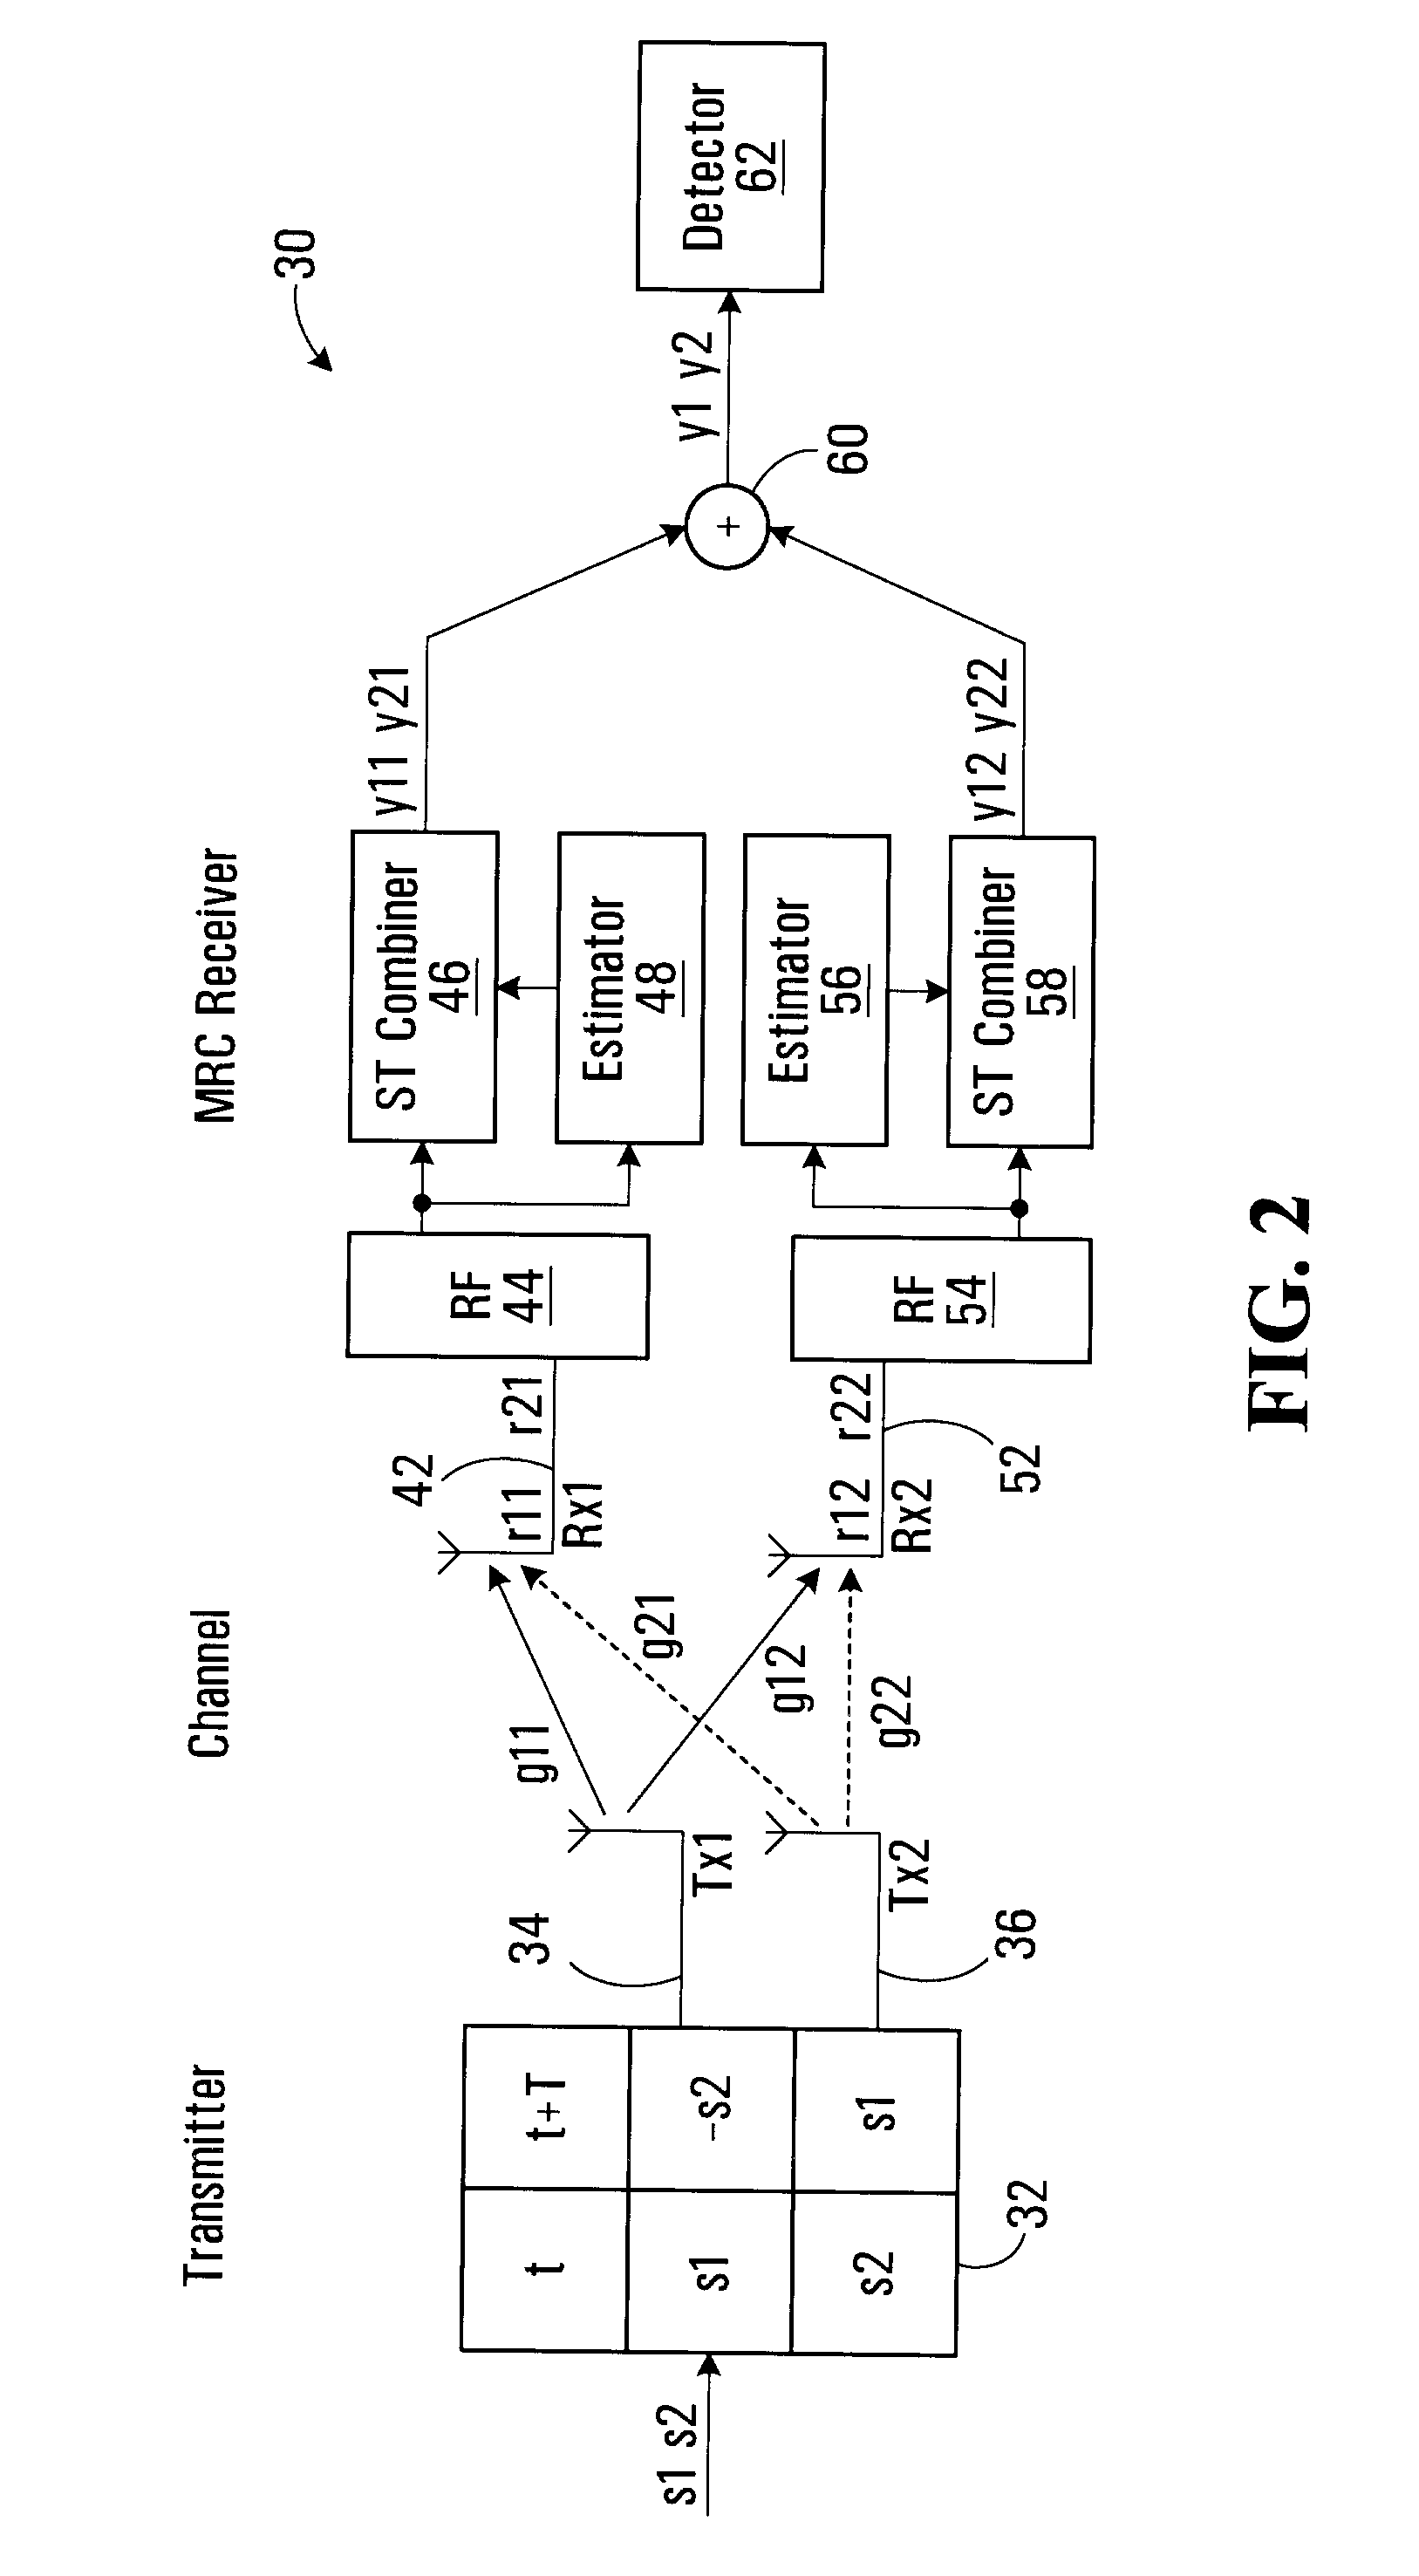 Antenna Selection Apparatus and Methods